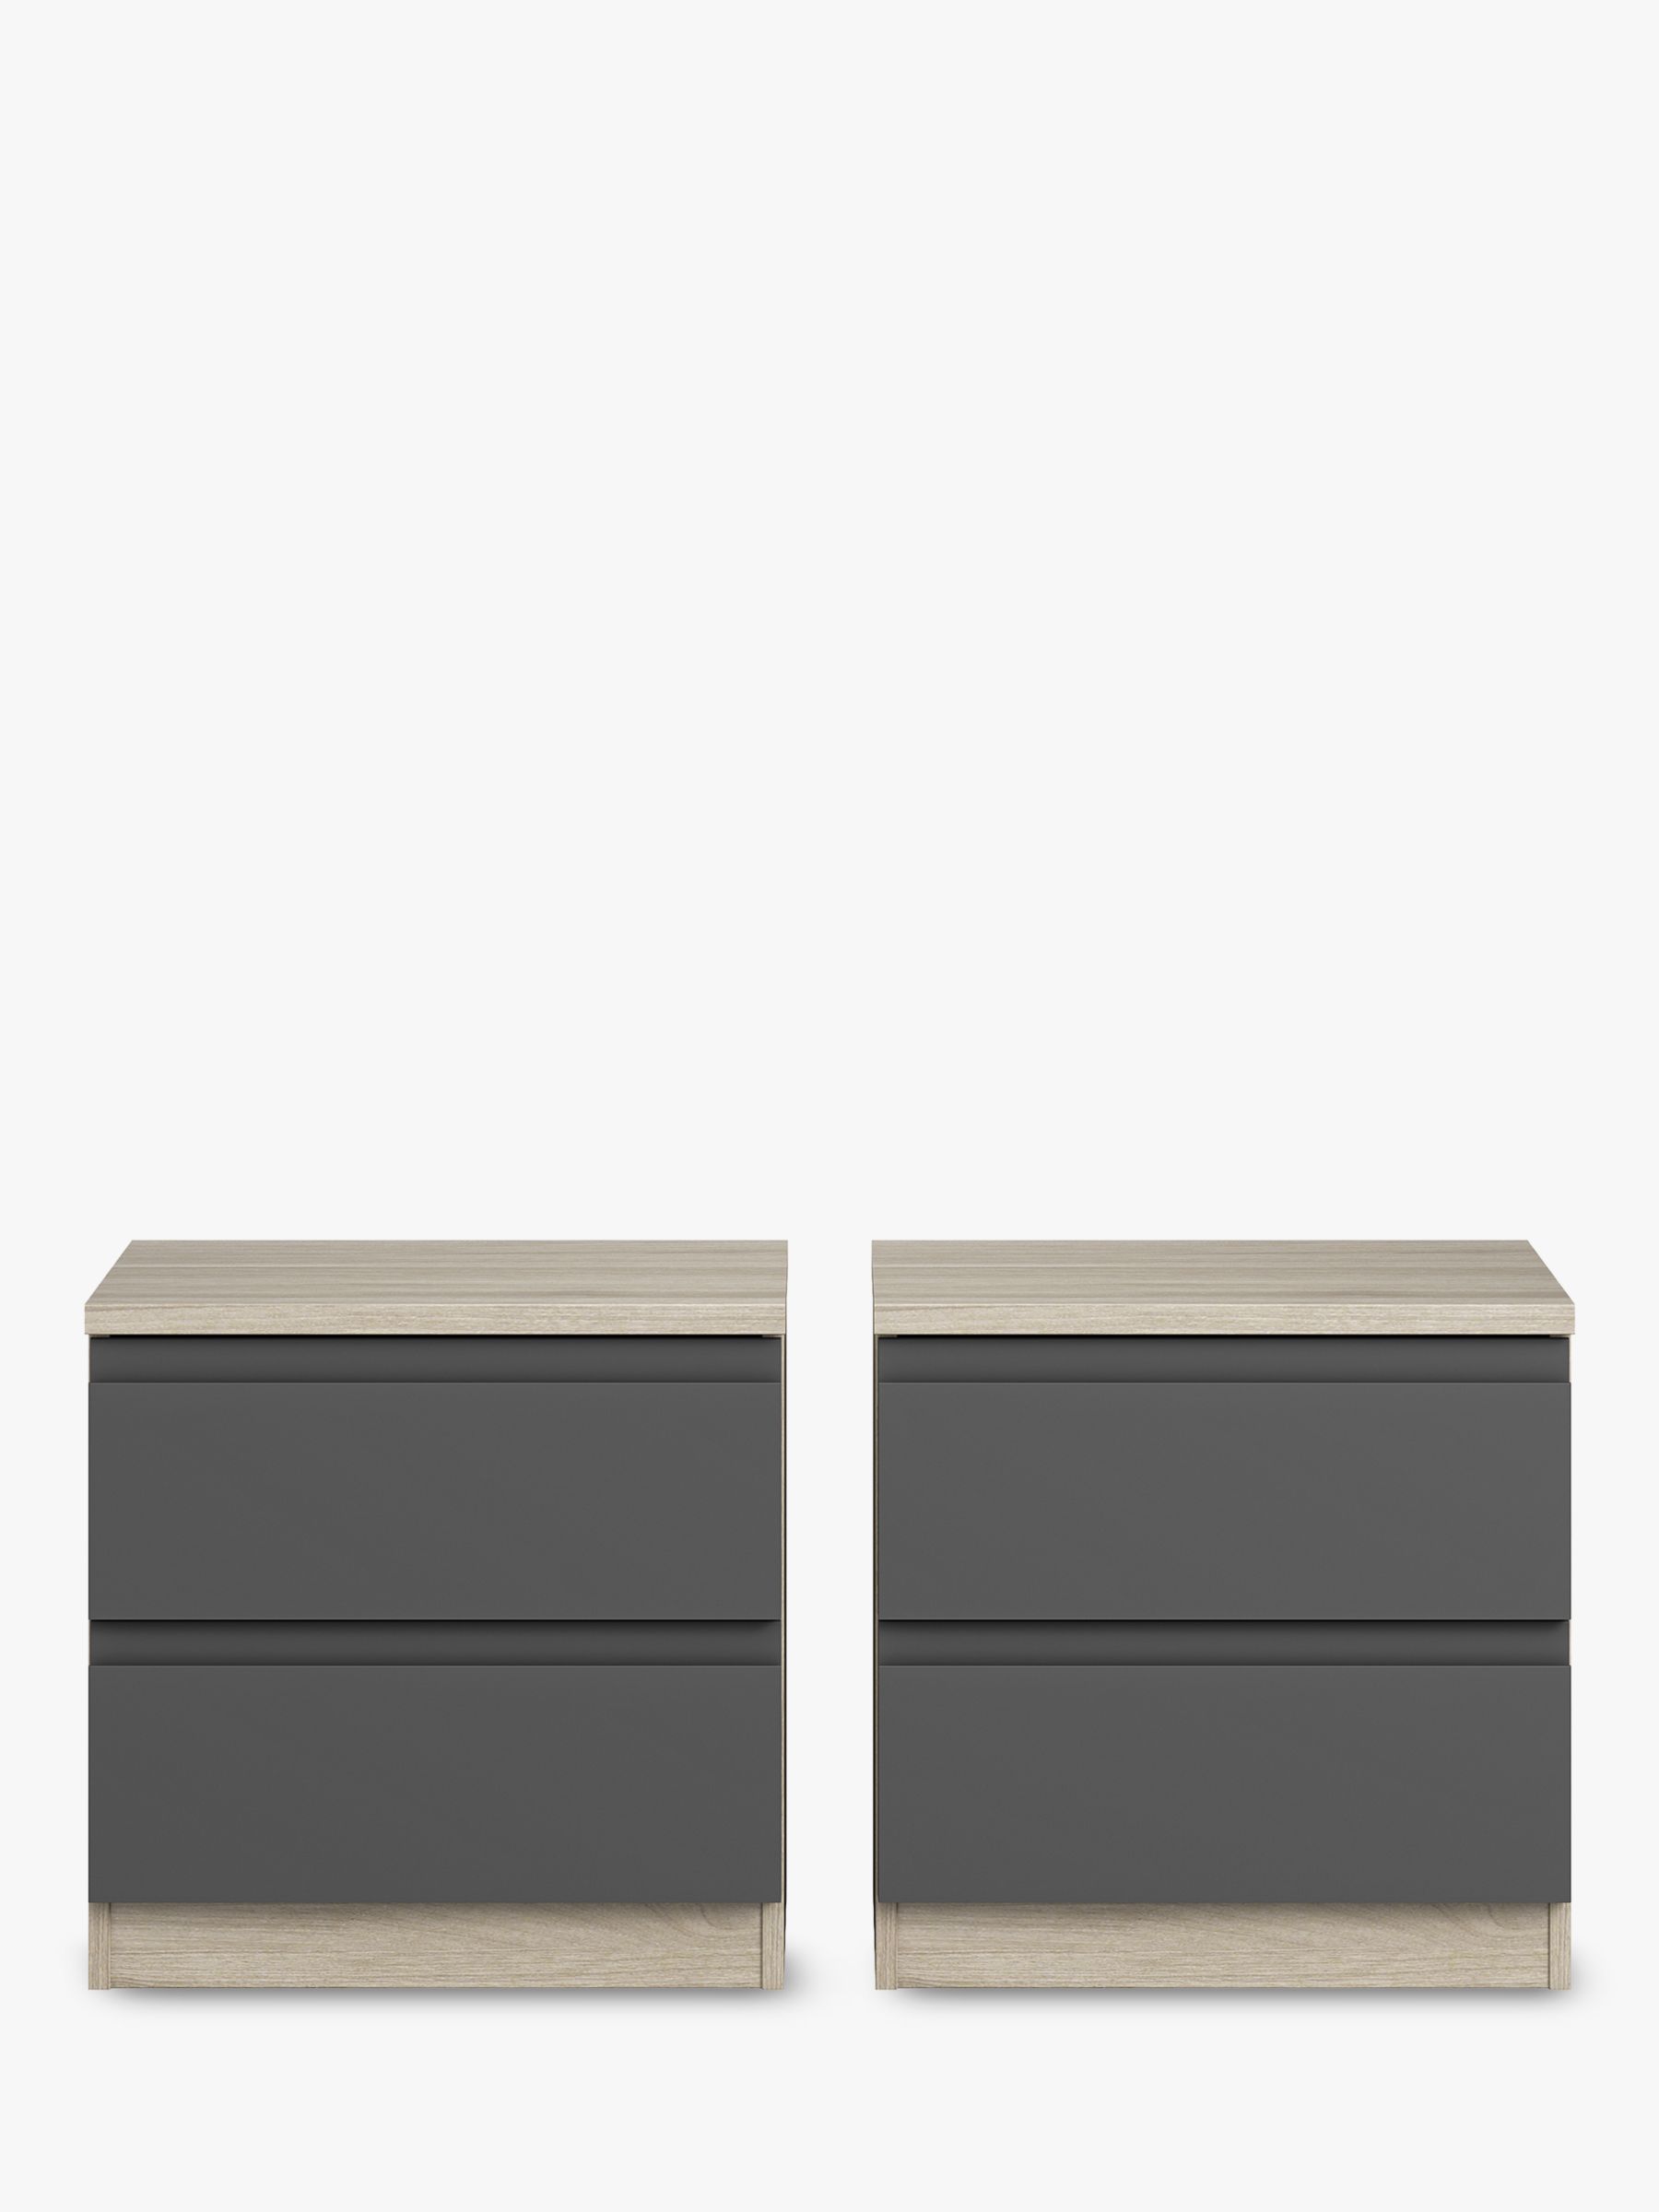 Photo of John lewis anyday mix it bedside tables set of 2 grey ash/graphite